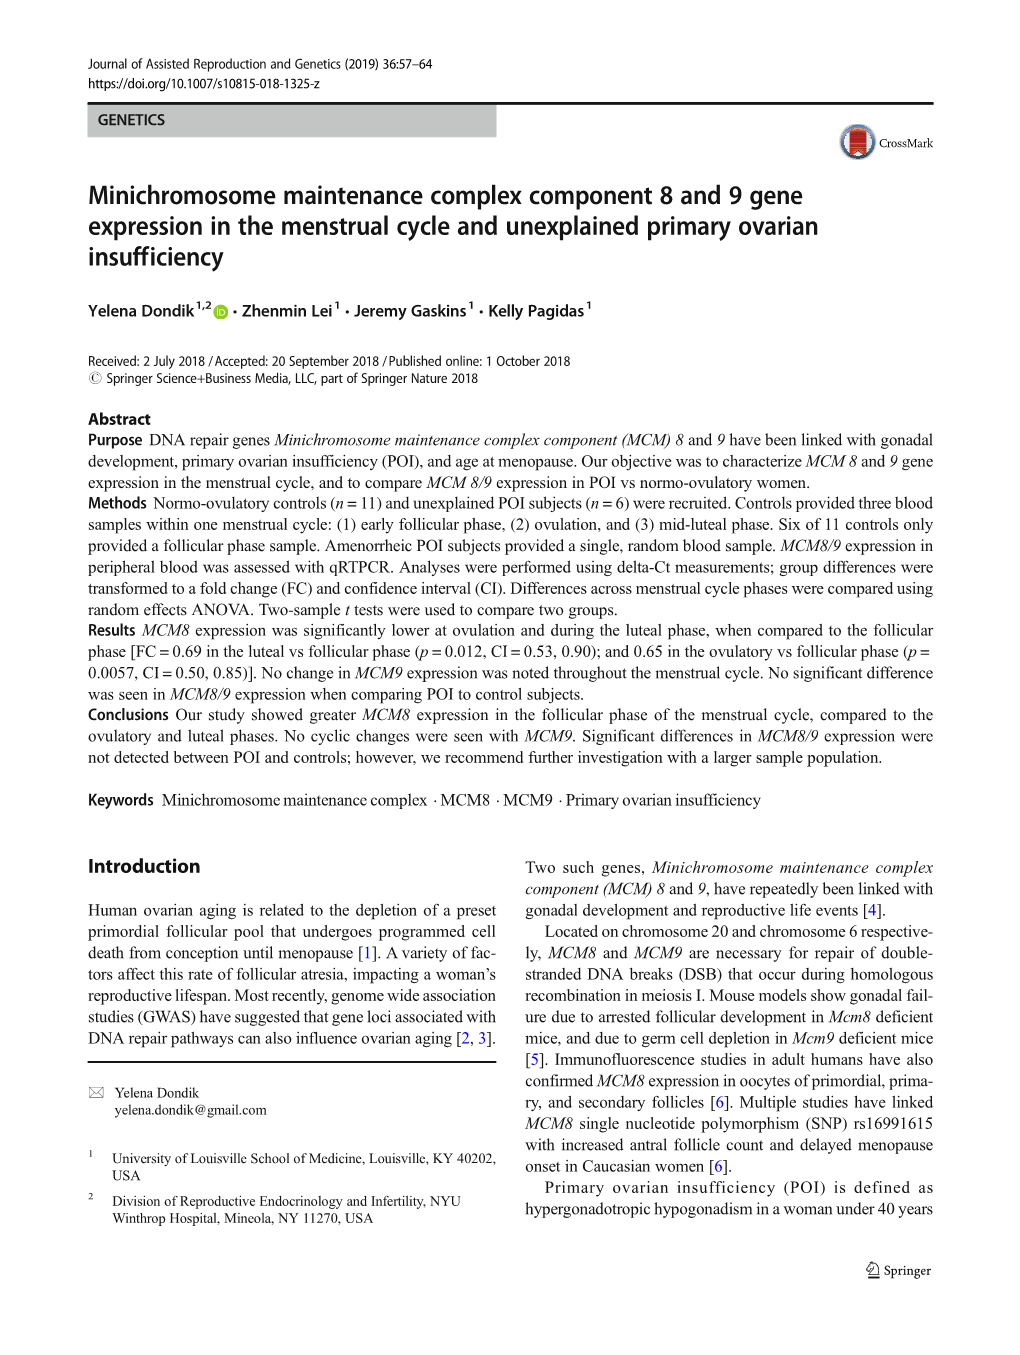 Minichromosome Maintenance Complex Component 8 and 9 Gene Expression in the Menstrual Cycle and Unexplained Primary Ovarian Insufficiency